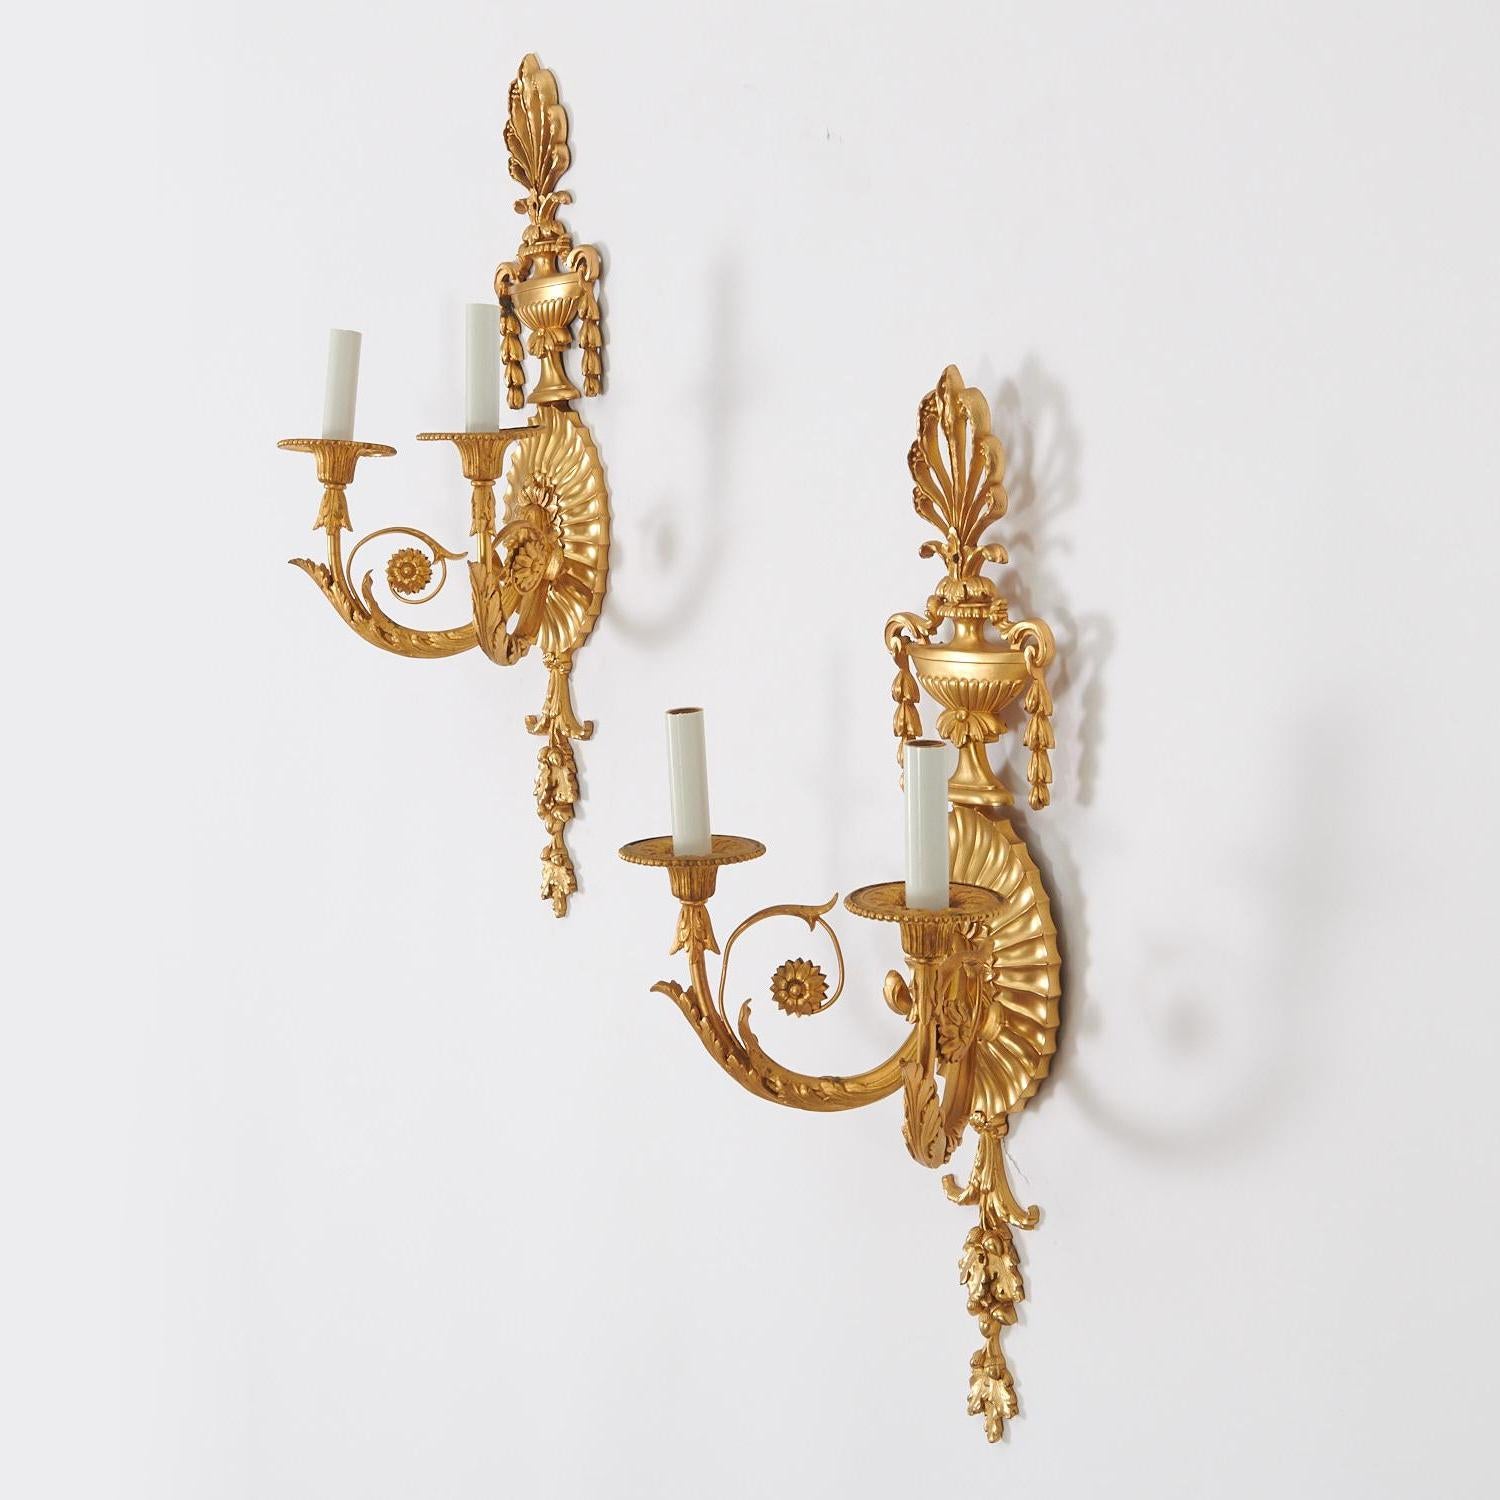 Each sconce with two arms issuing from a channeled oval backplate topped with an urn and plume finial, impressed manufacturer mark on reverse,

Maker: Edward F. Caldwell Co. (1851-1914)
Origin: American
Date: Early 20th century
Dimension: 23